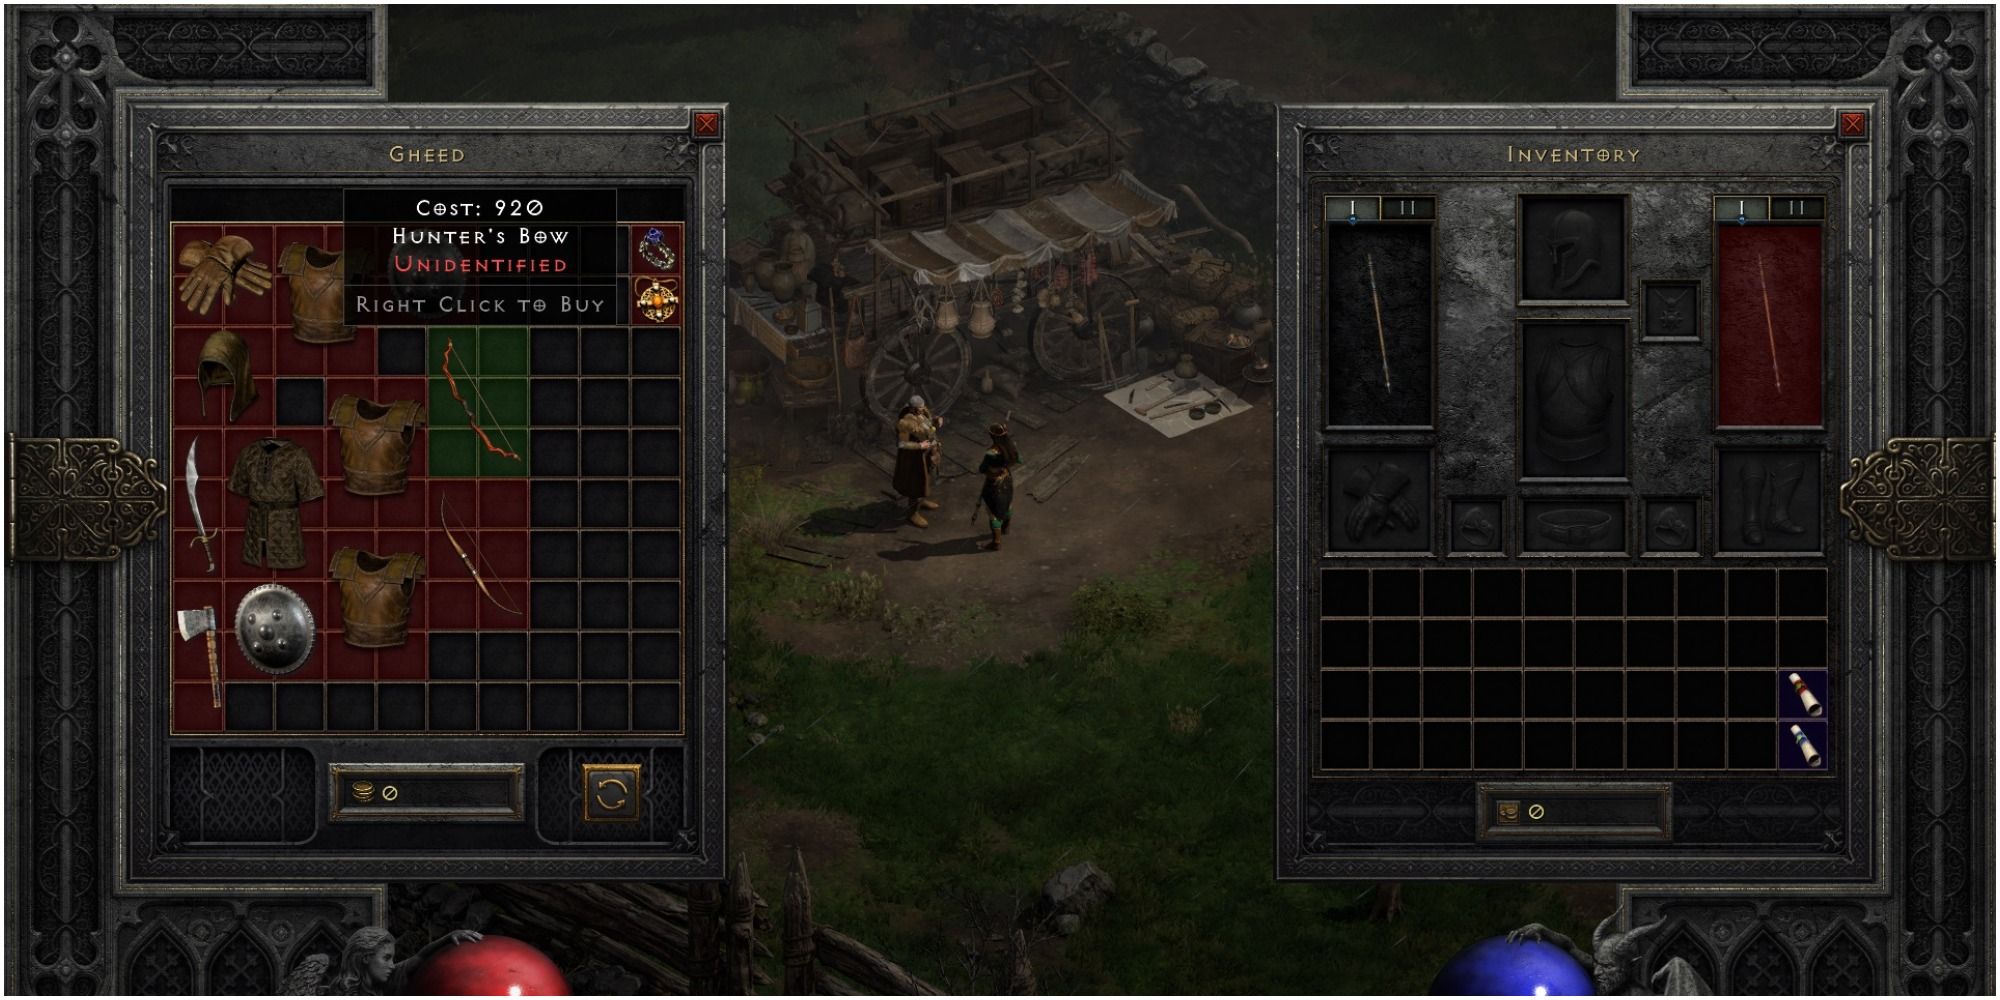 Diablo 2 Resurrected Choose Which Item To Buy On A Gamble With Gheed